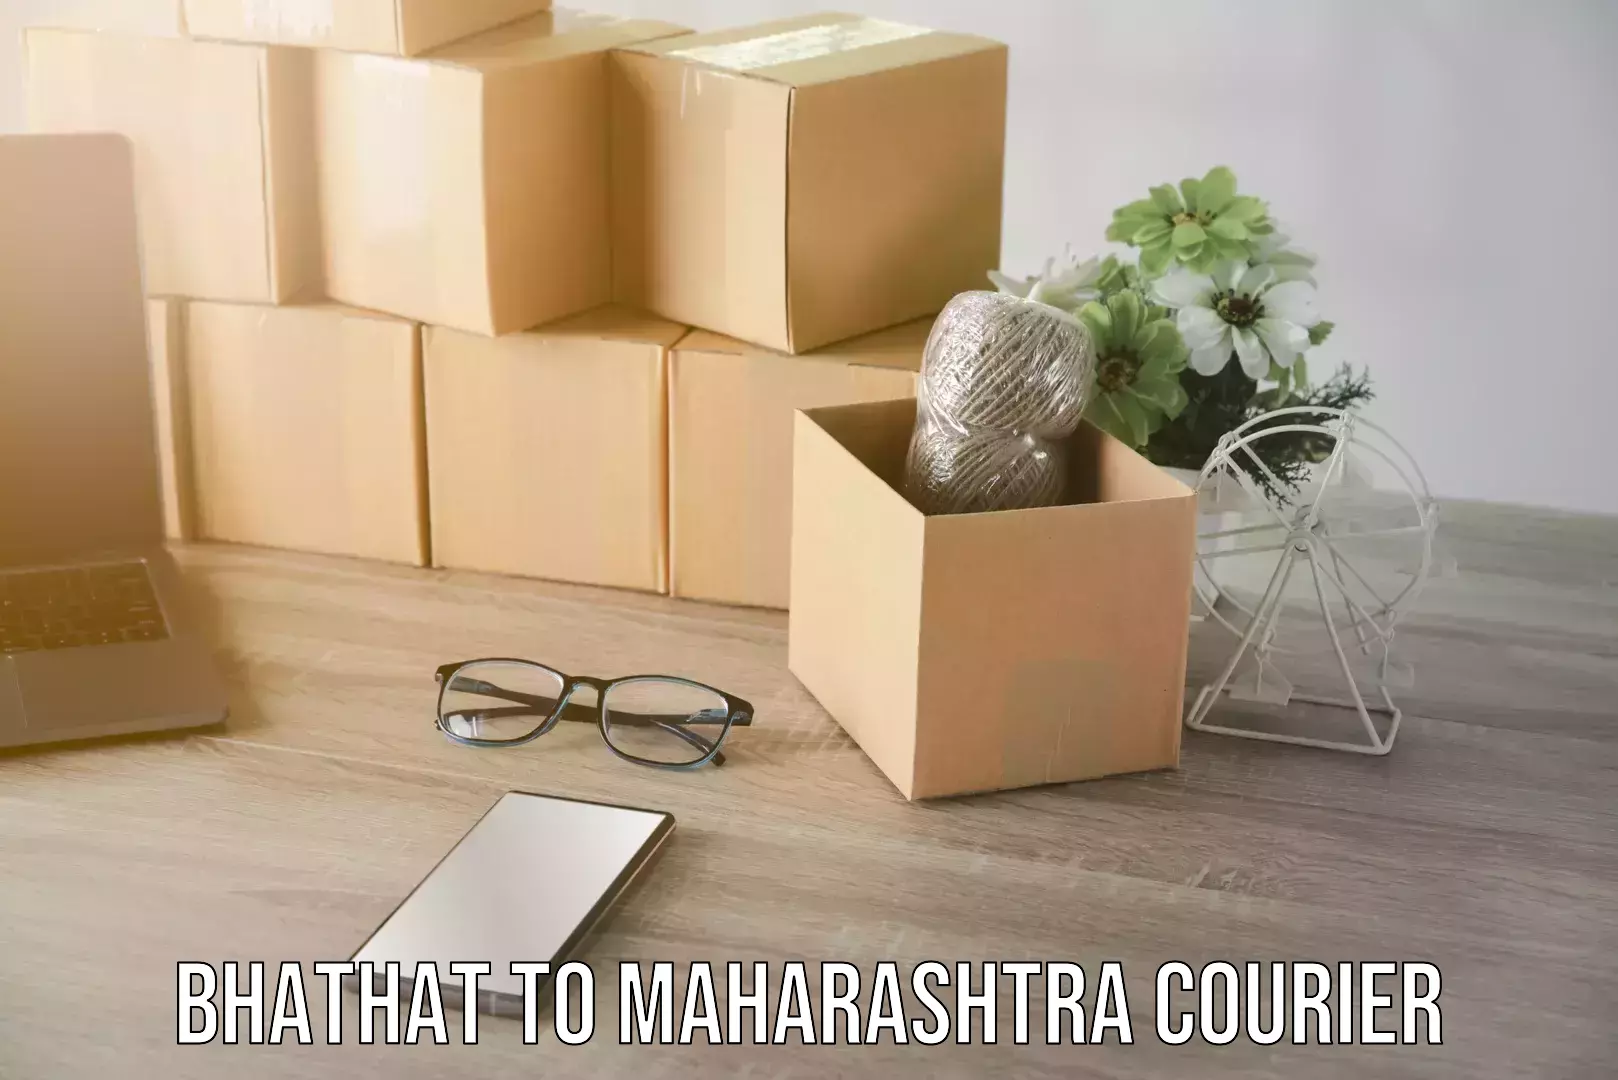 Same-day delivery solutions Bhathat to Maharashtra